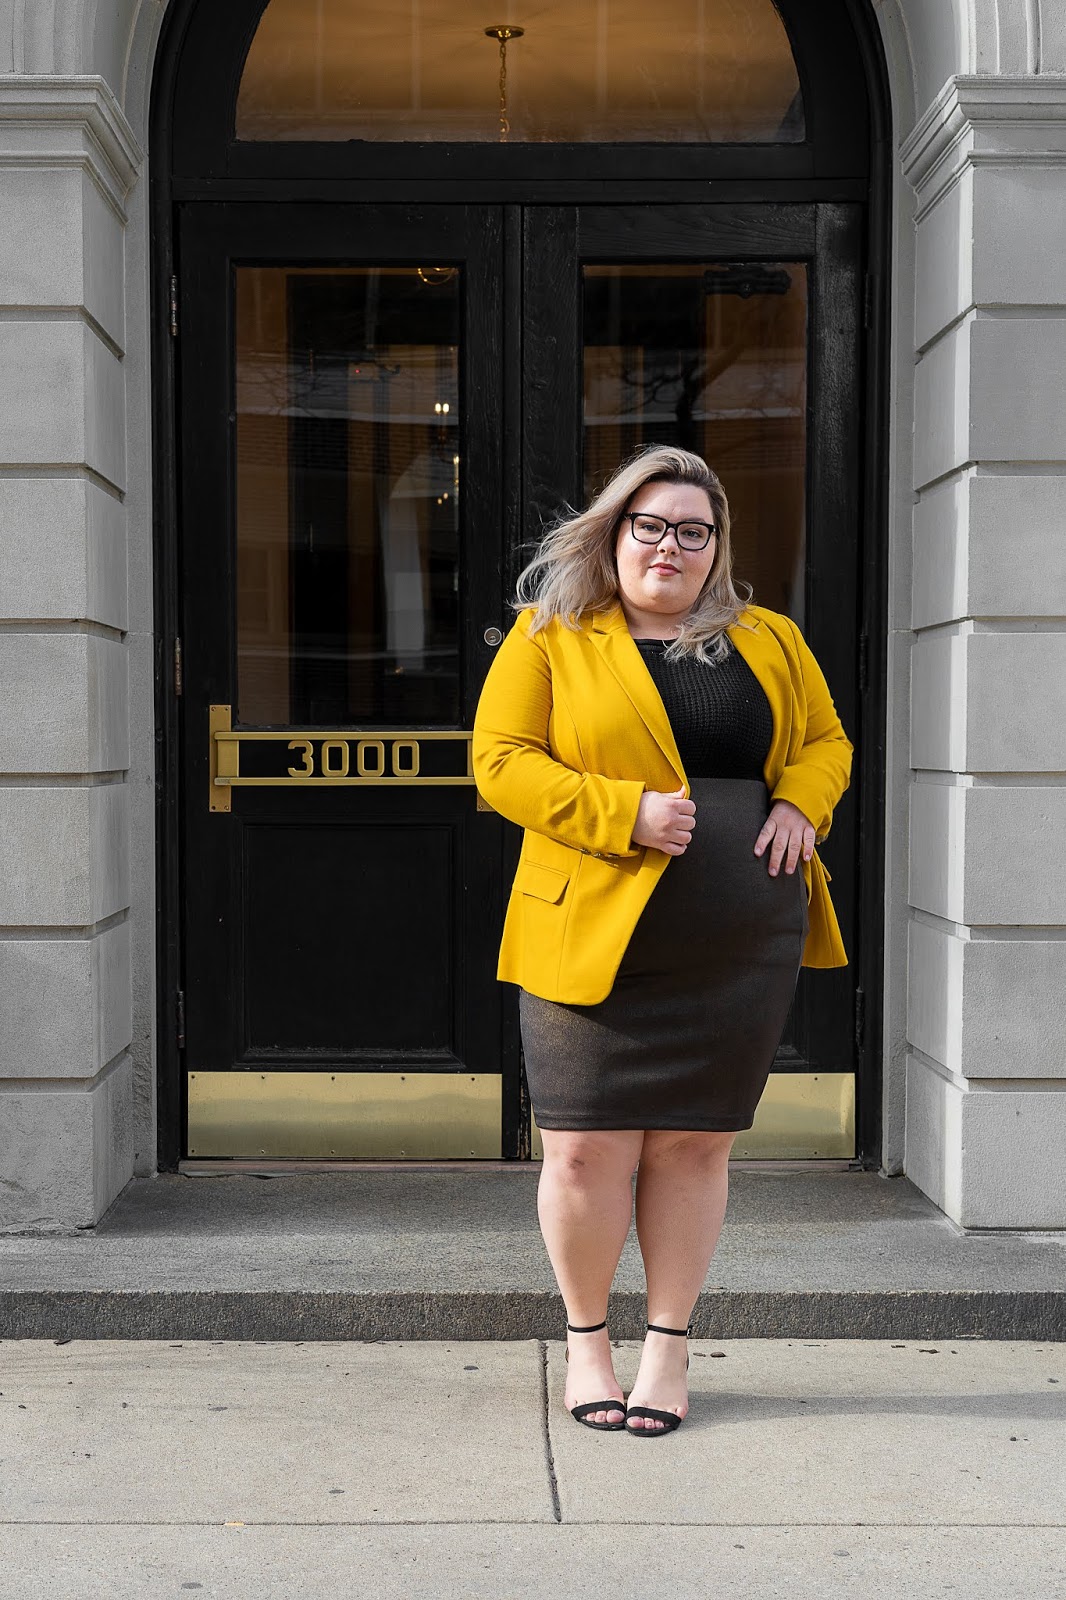 Chicago Plus Size Petite Fashion Blogger and model Natalie Craig, of Natalie in the City, reviews Marée Pour Toi's Mustard Compression Blazer and Foiled Scuba Skirt